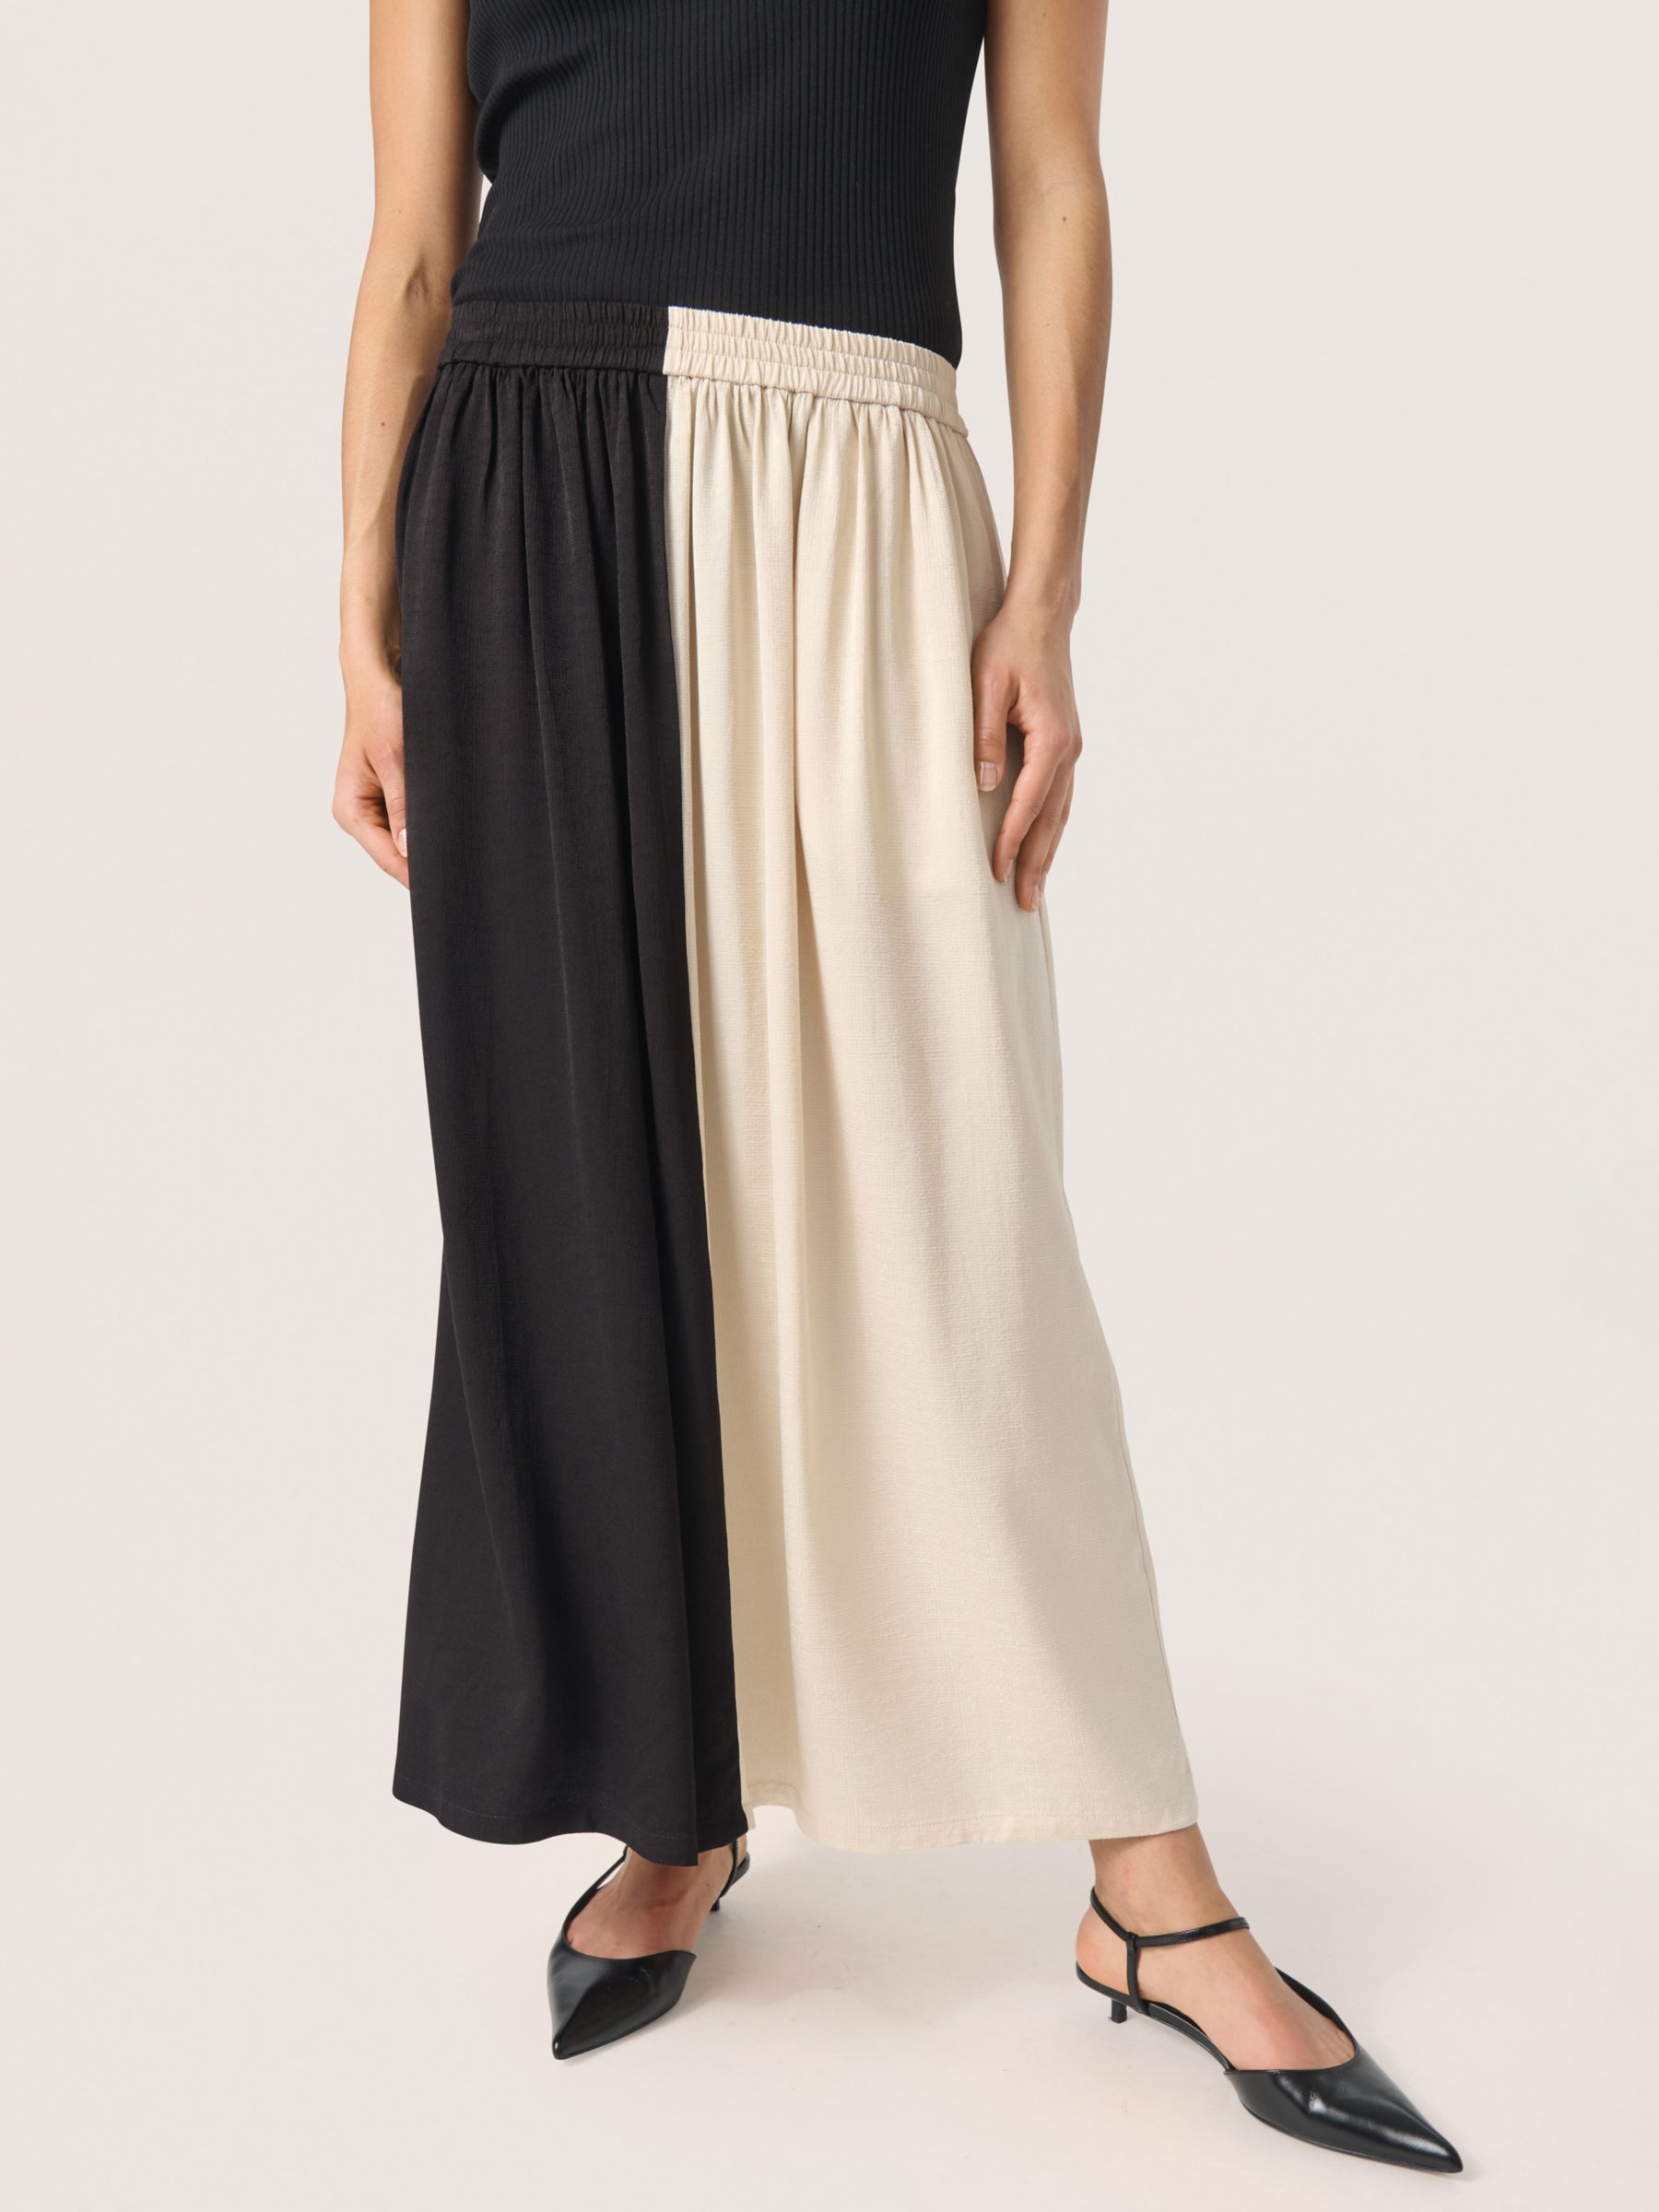 Buy Soaked In Luxury Cevina Two Tone A-Line Maxi Skirt, Black/White Online at johnlewis.com